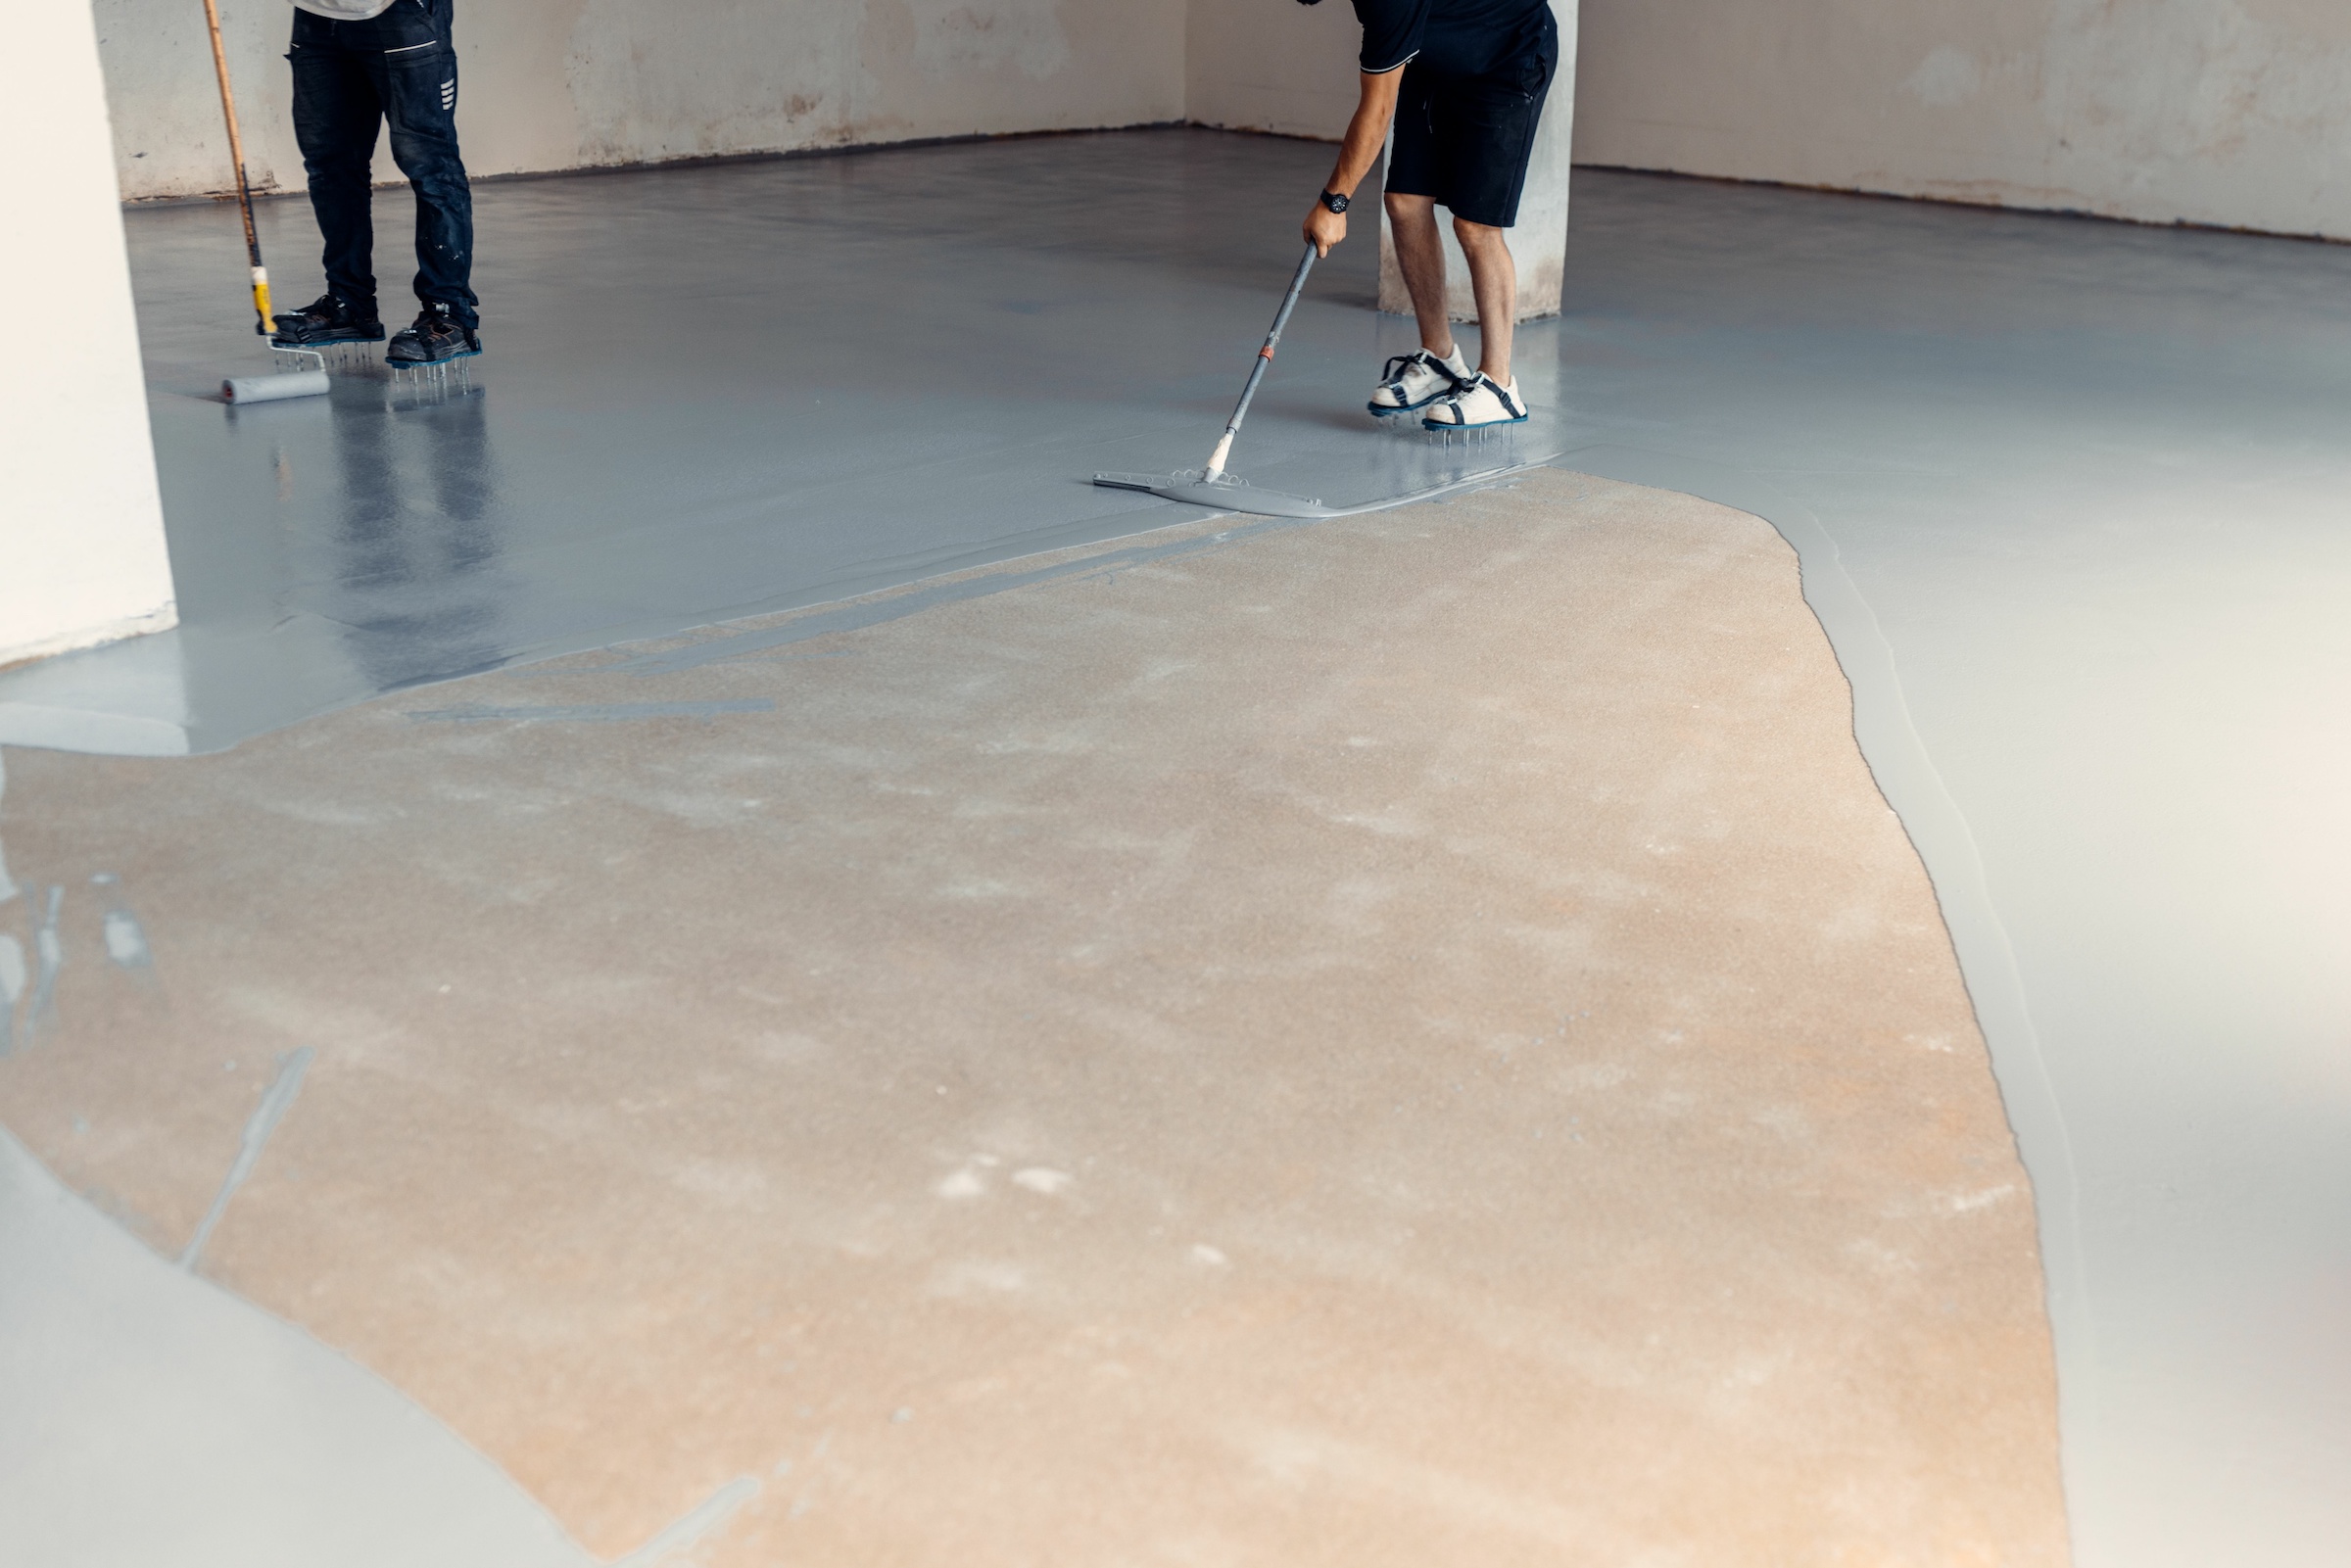 Construction workers applying grey epoxy resin in an industrial hall